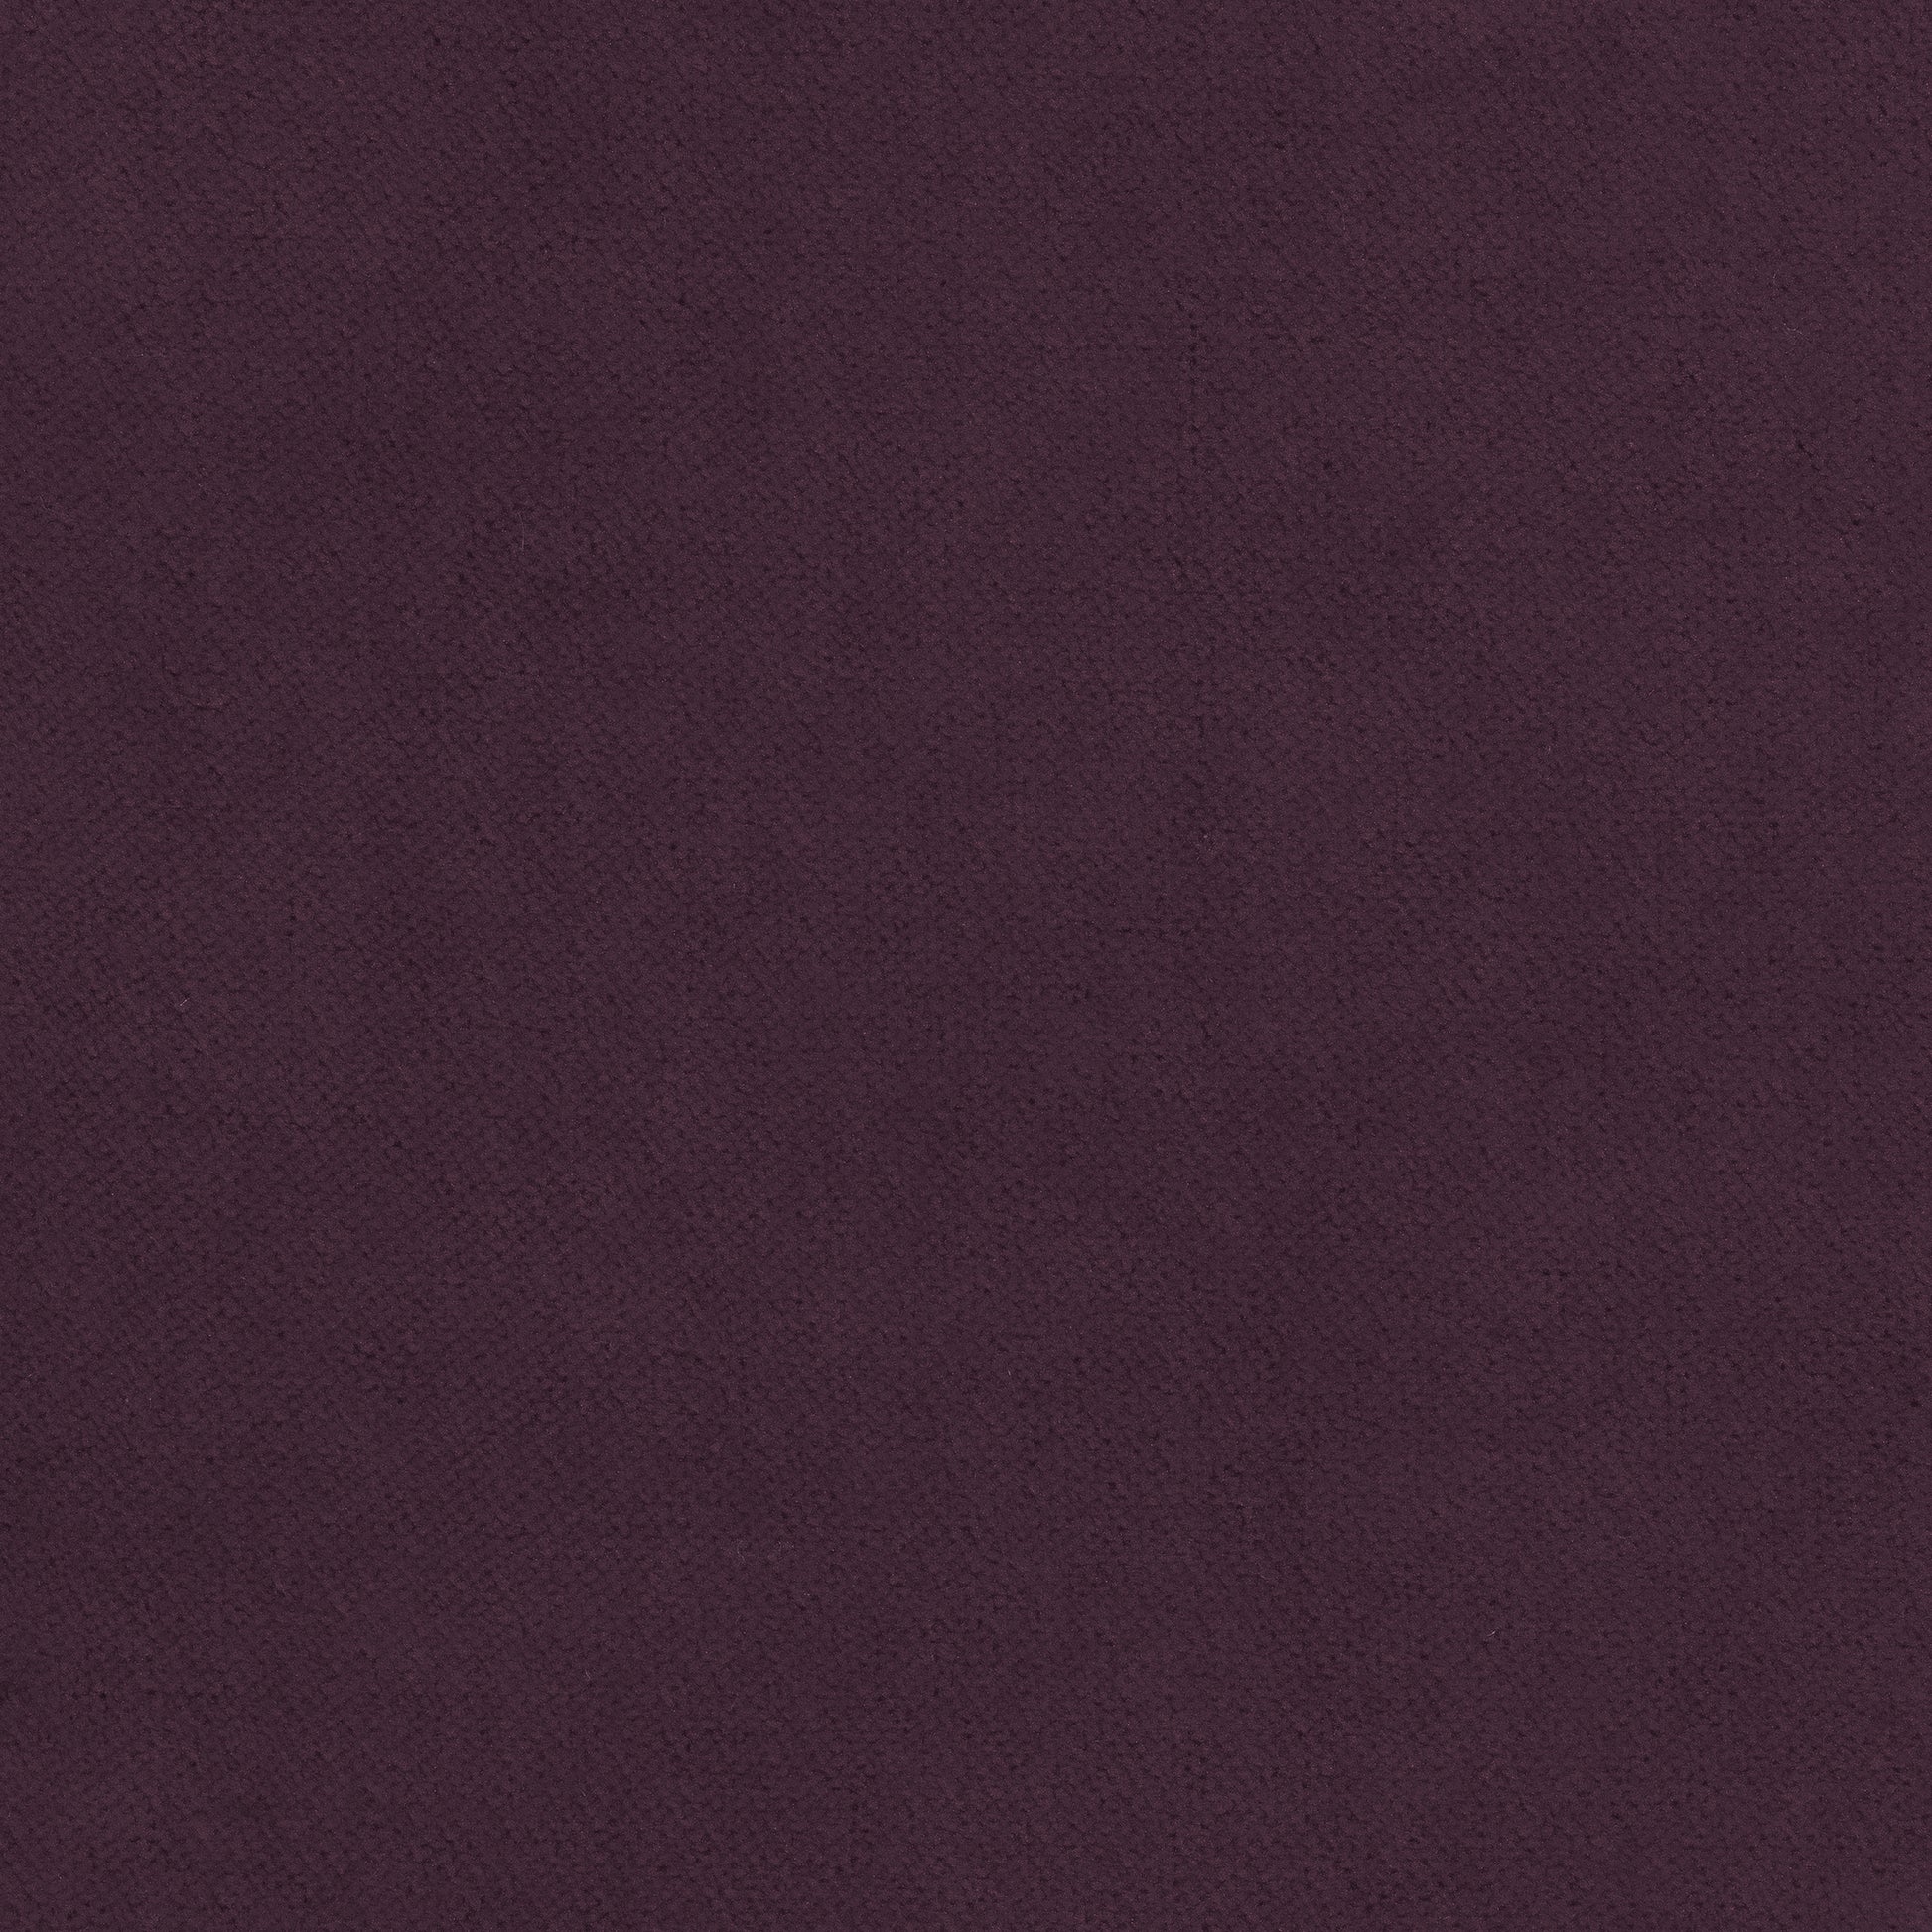 Purchase Thibaut Fabric Item# W7212 pattern name Club Velvet color Amethyst